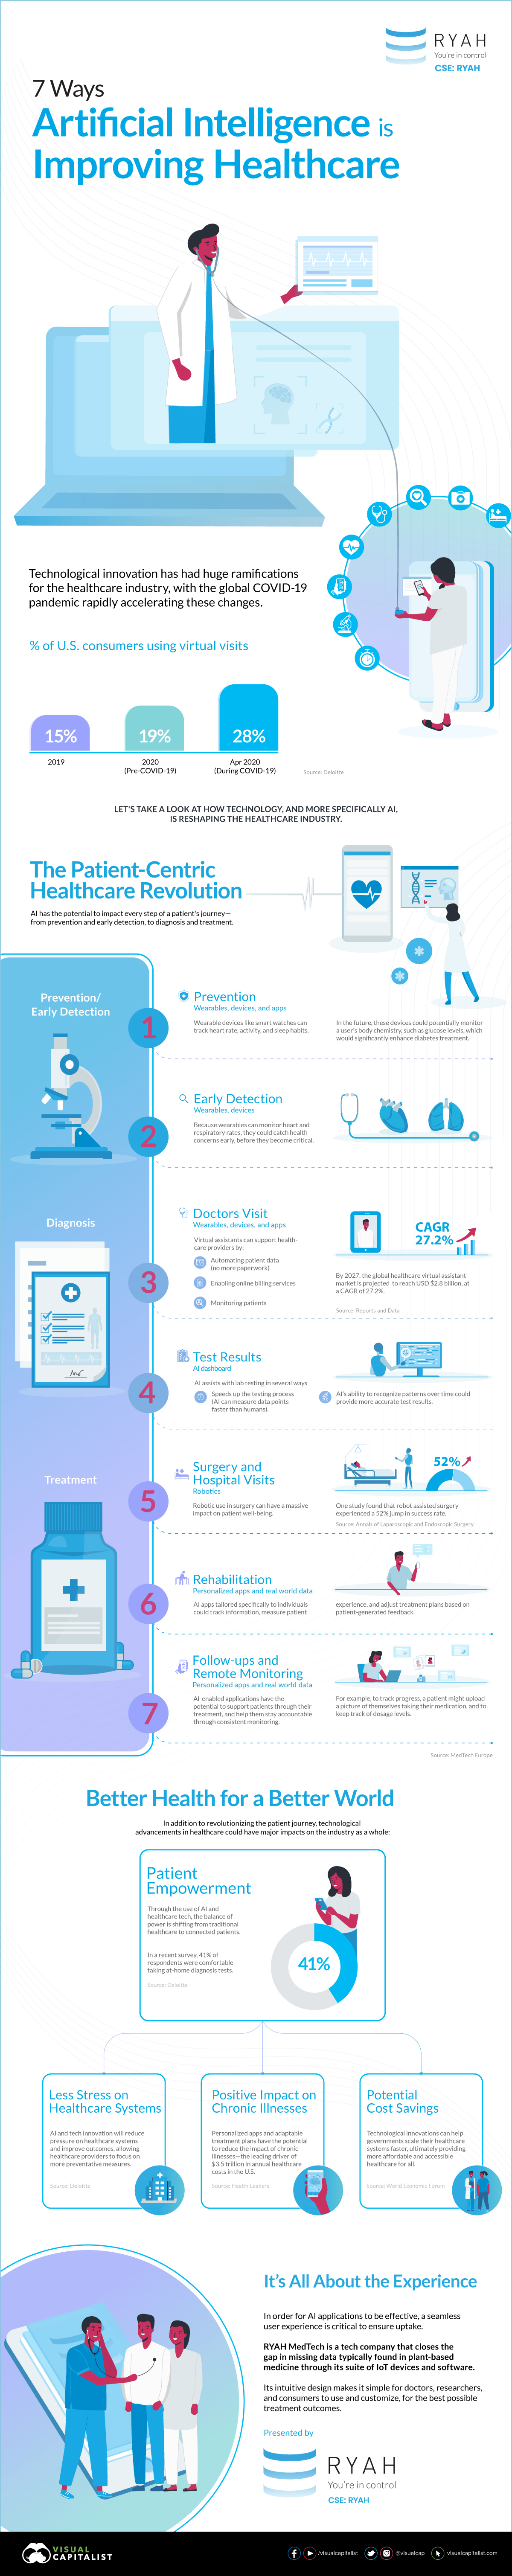 artificial intelligence in healthcare infographic